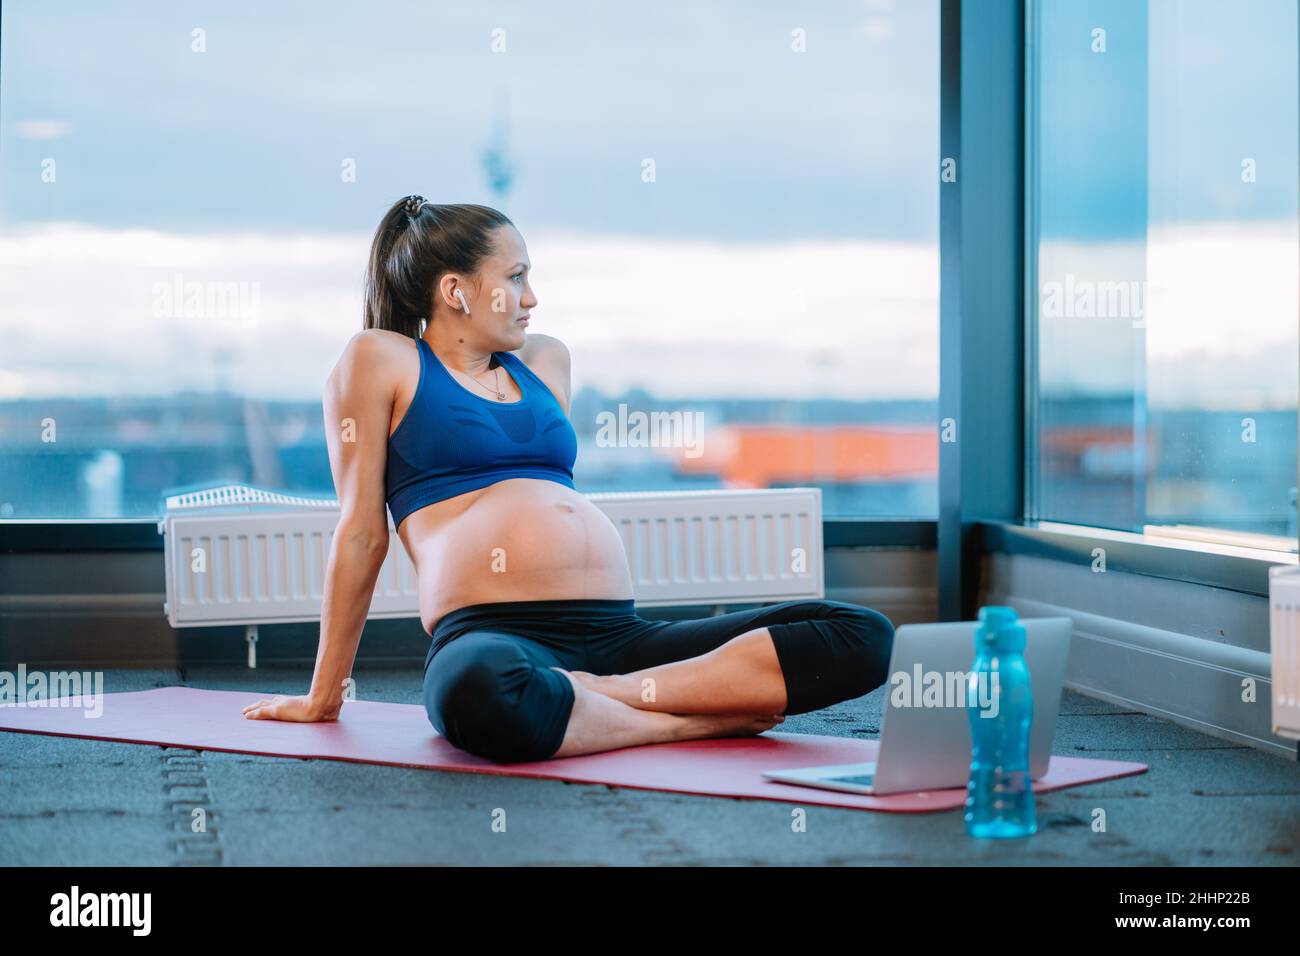 Pregnant woman in wireless earbuds resting during online prenatal workout at gym Stock Photo